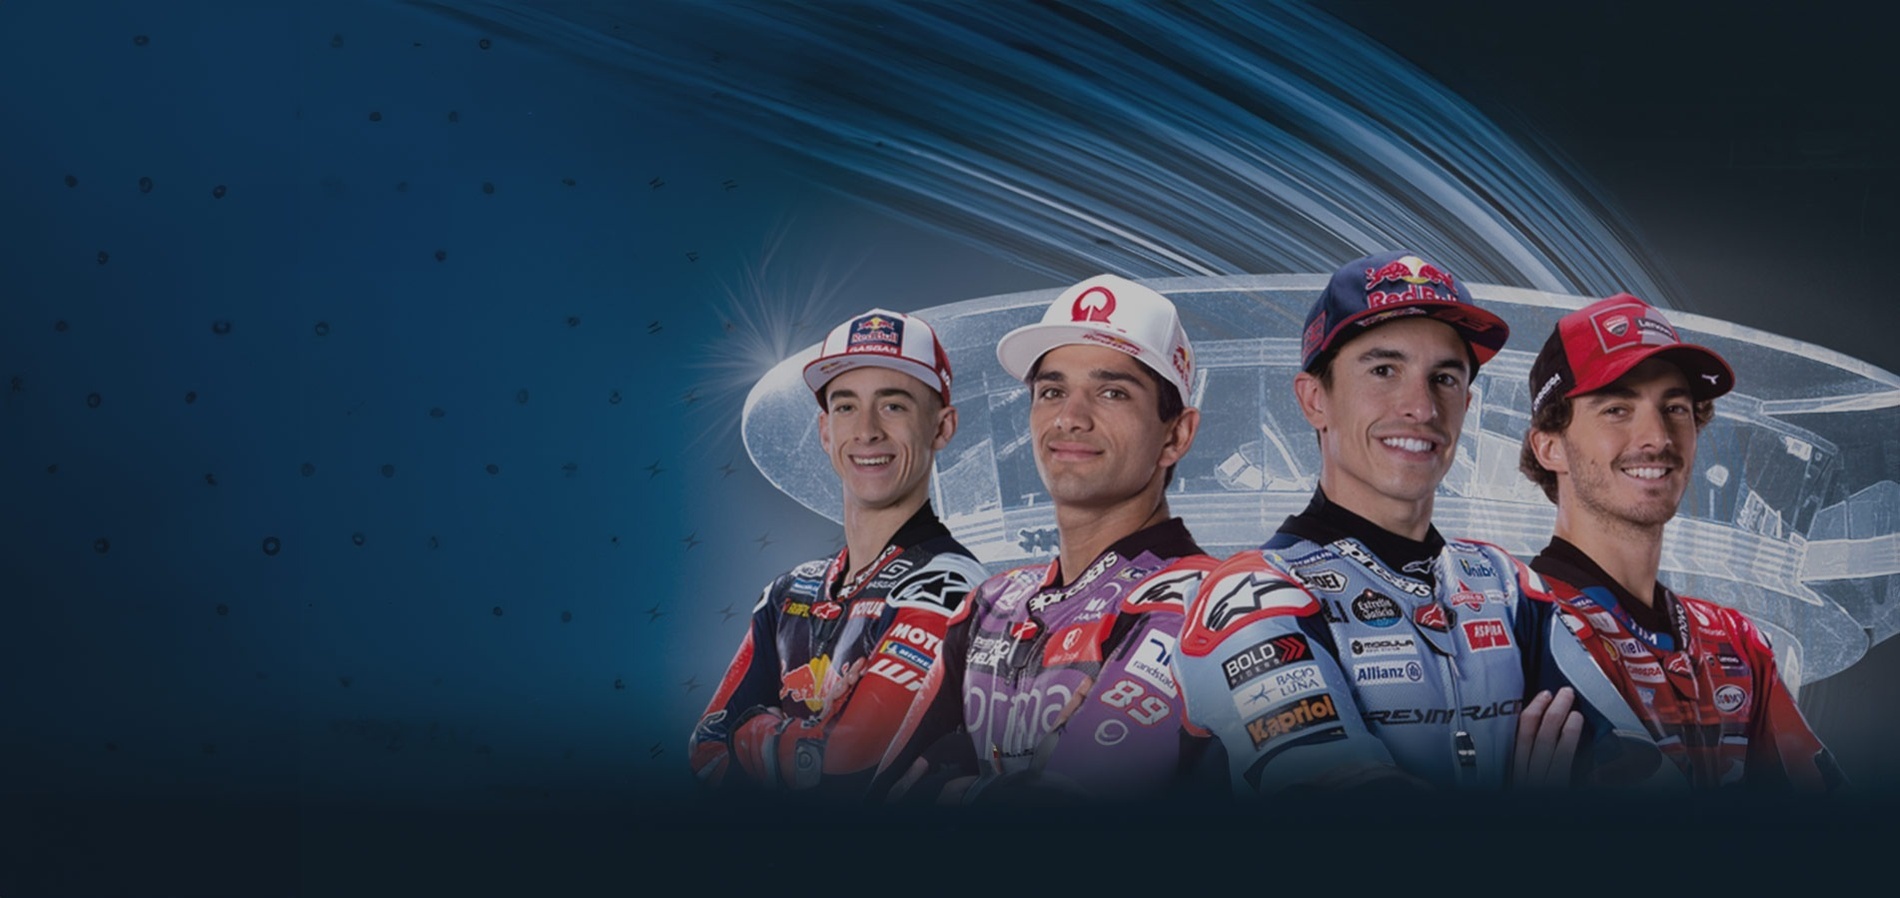 four motorcycle racers standing next to each other with one wearing a red bull hat